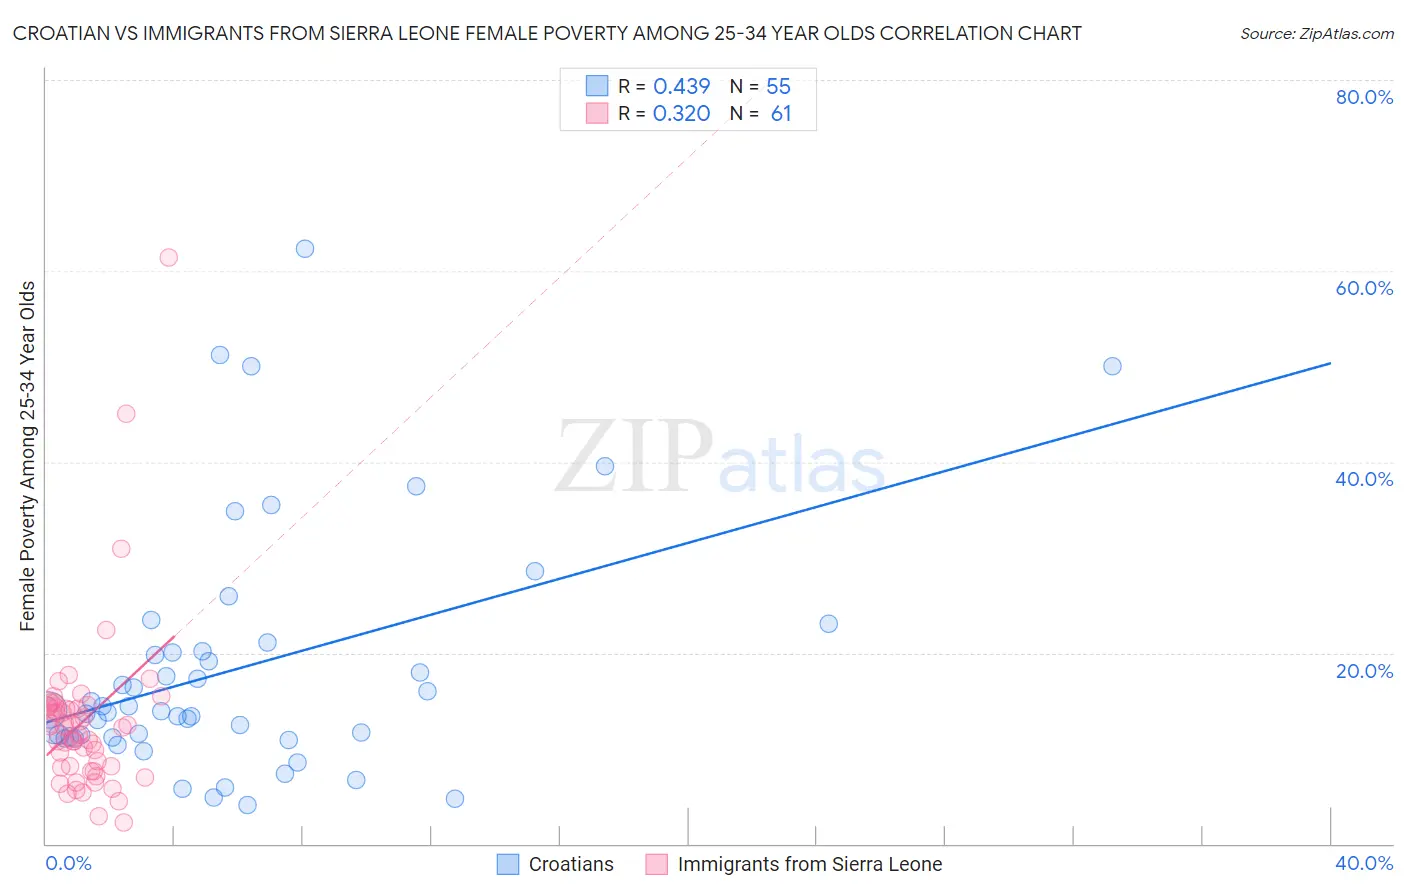 Croatian vs Immigrants from Sierra Leone Female Poverty Among 25-34 Year Olds